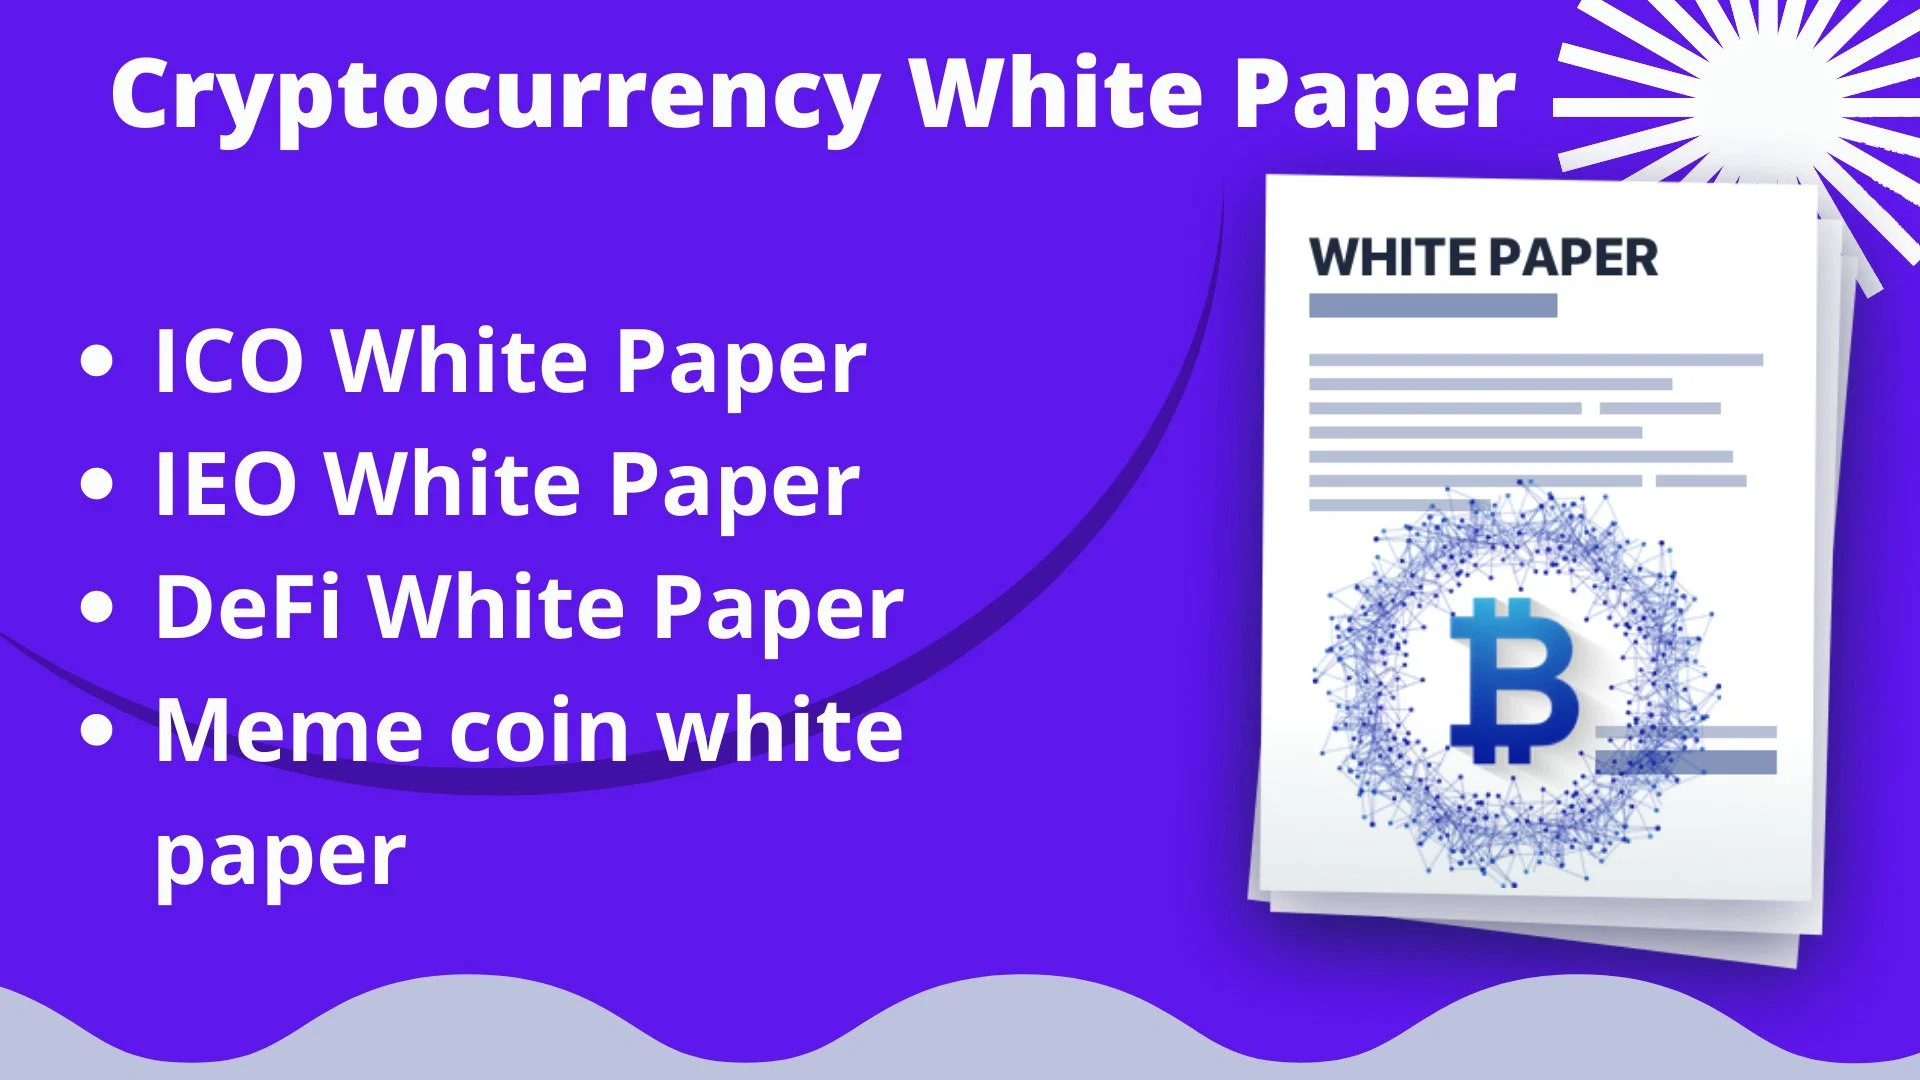 What Is a Crypto Whitepaper? A Detailed Look At These Publications